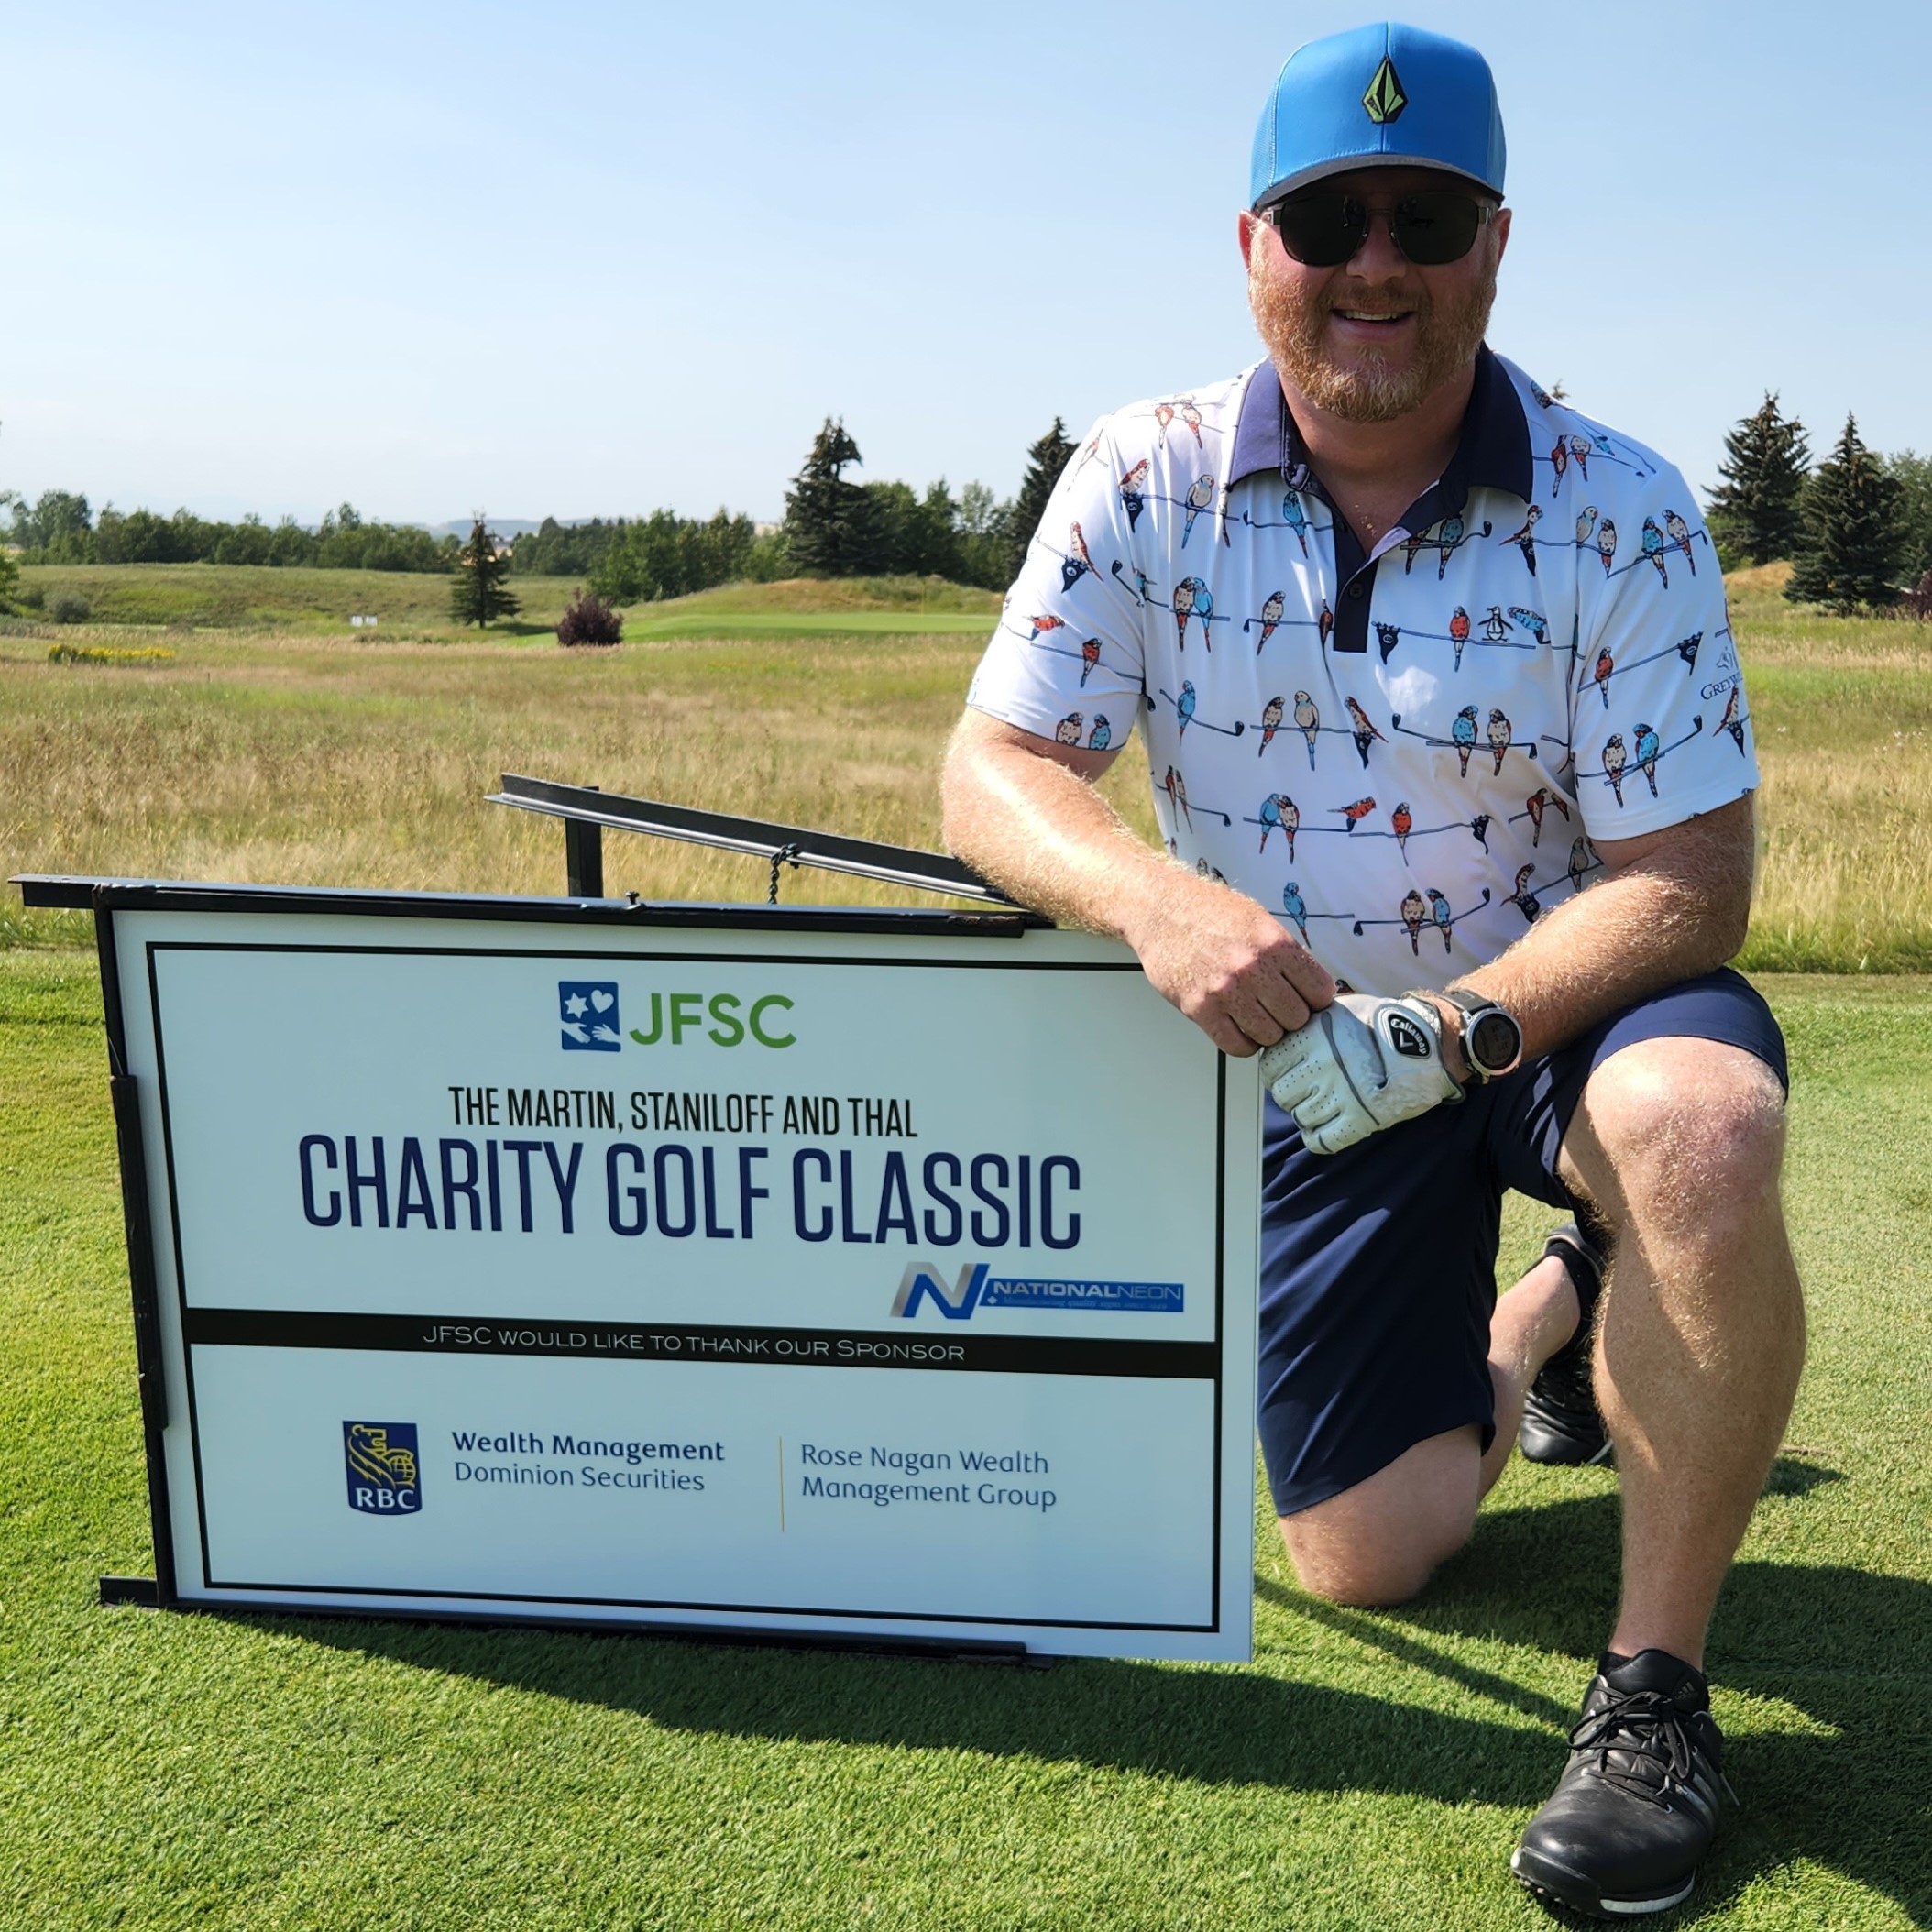 smiling man wearing golf gear kneeling next to a sign that says charity golf classic